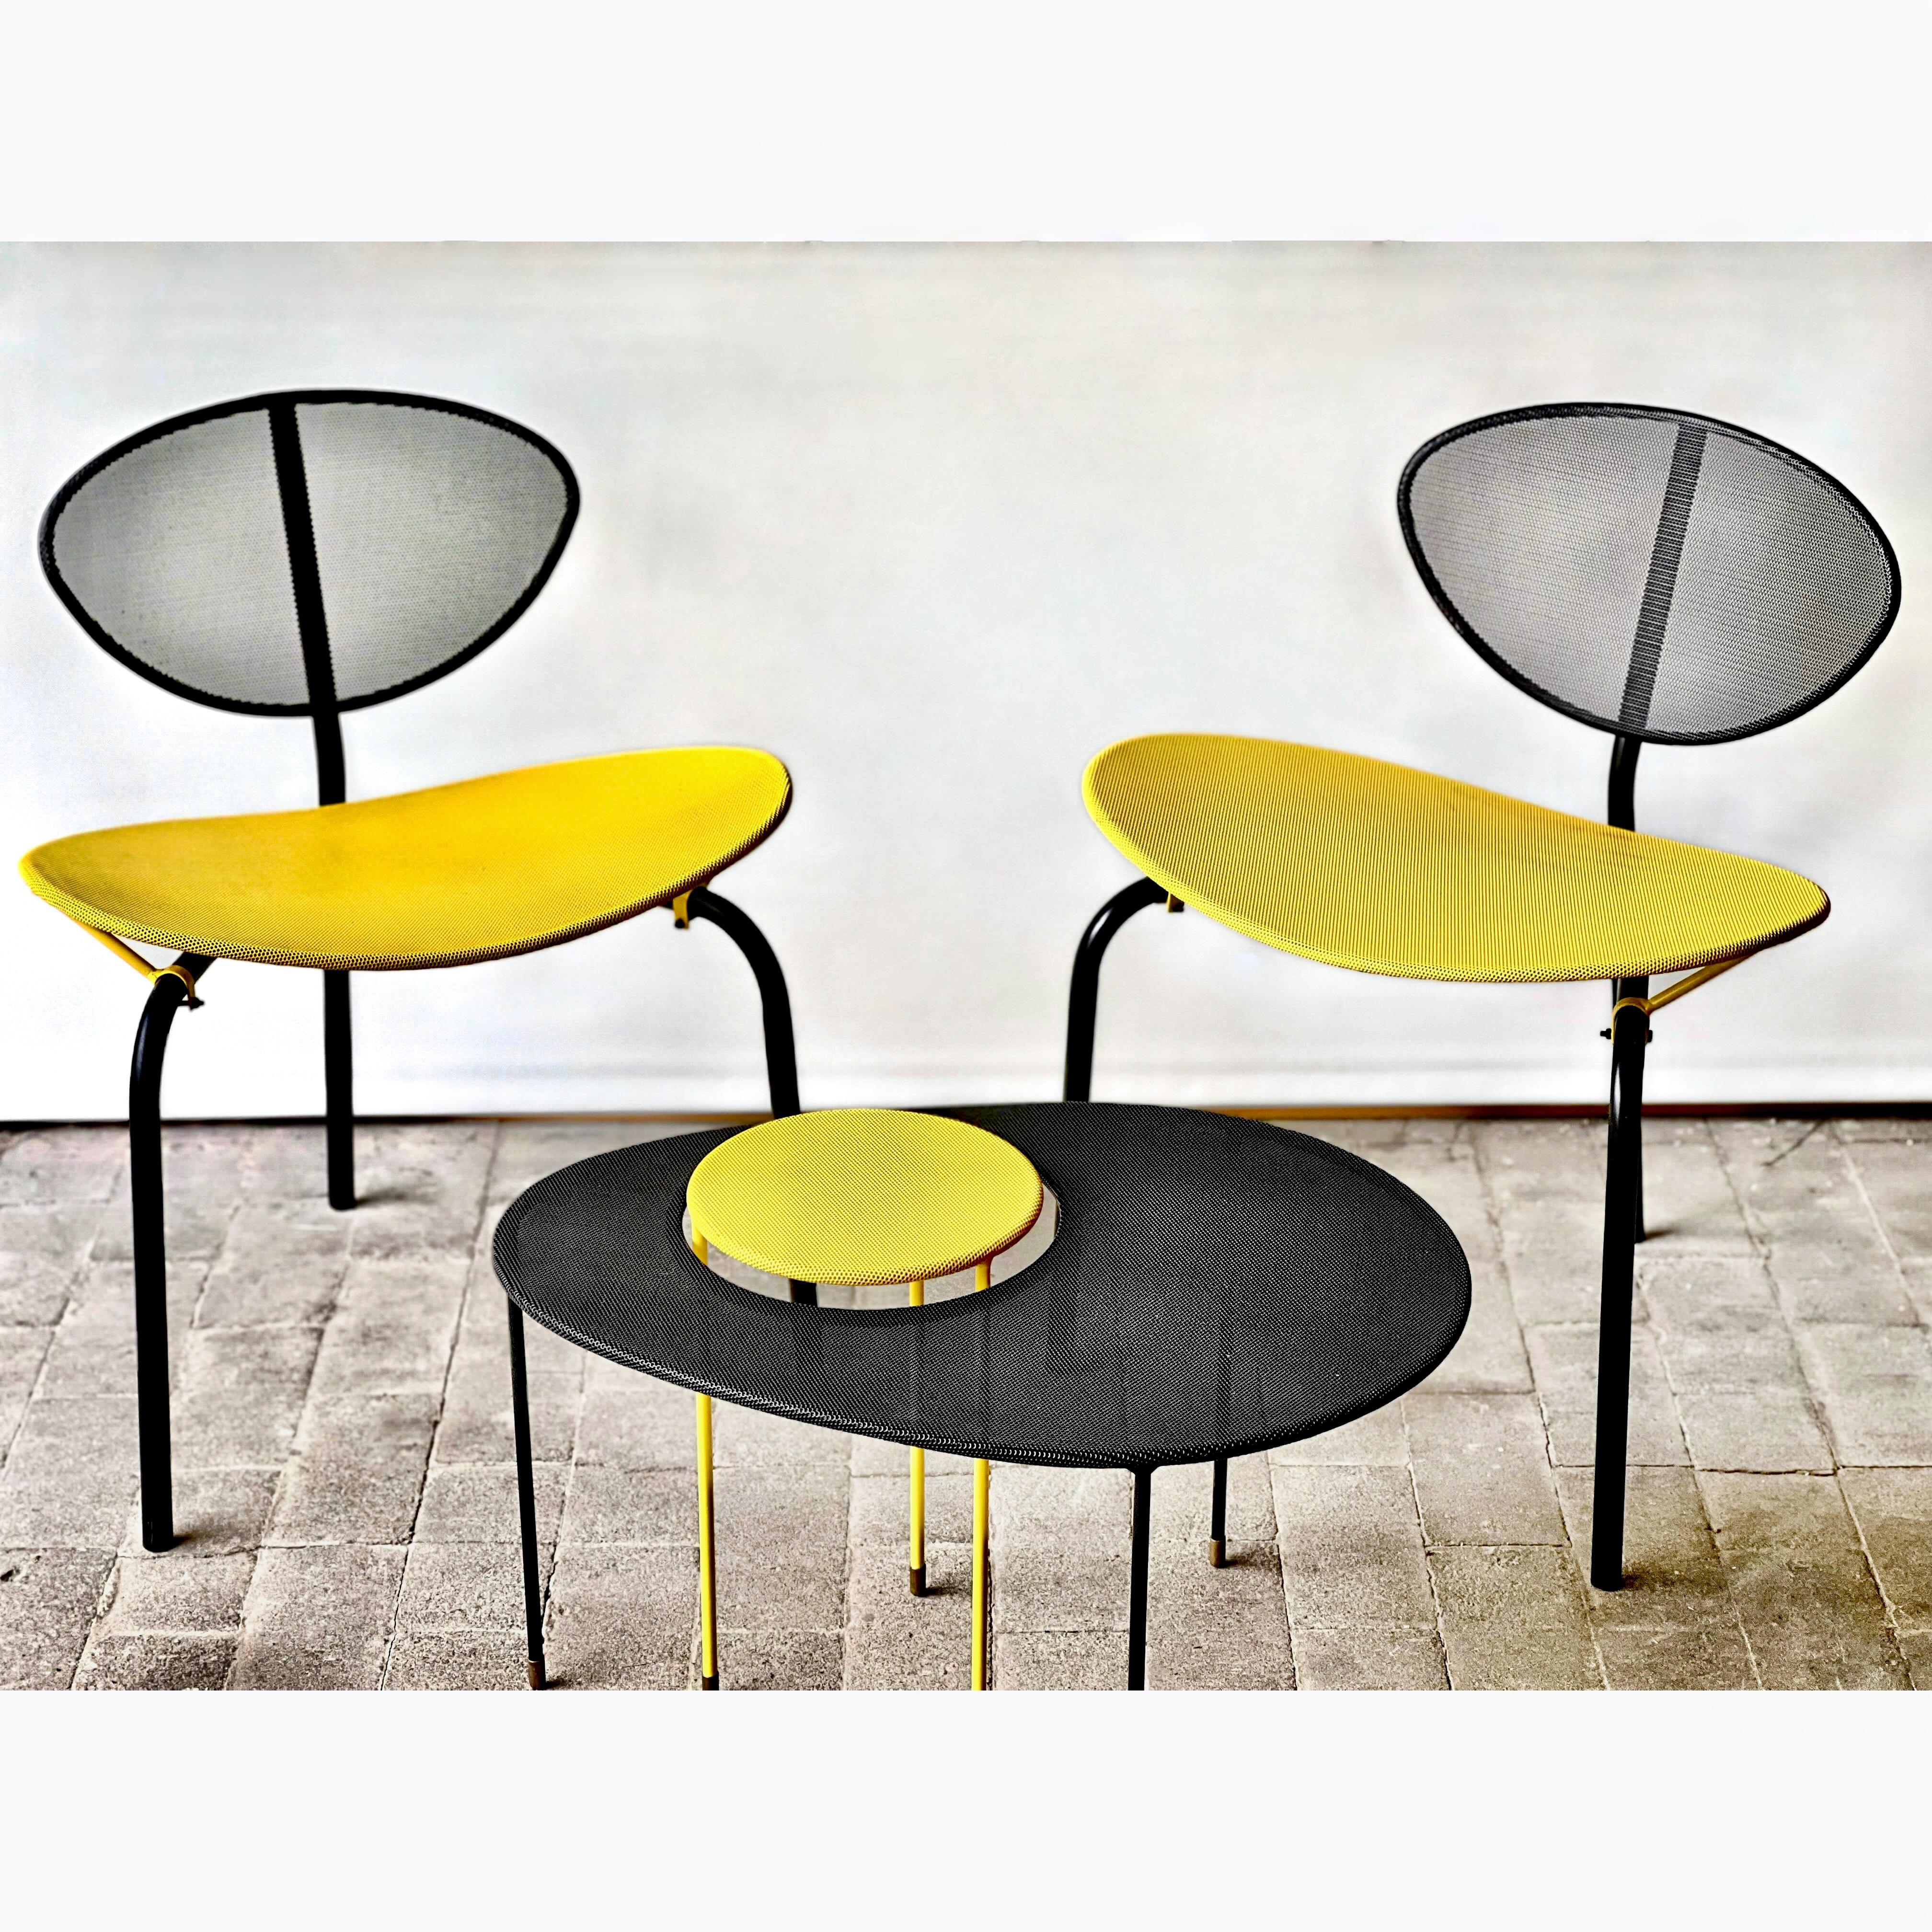 Mathieu Mategot Kangaroo side tables, set of two in black & yellow, for Gubi For Sale 8